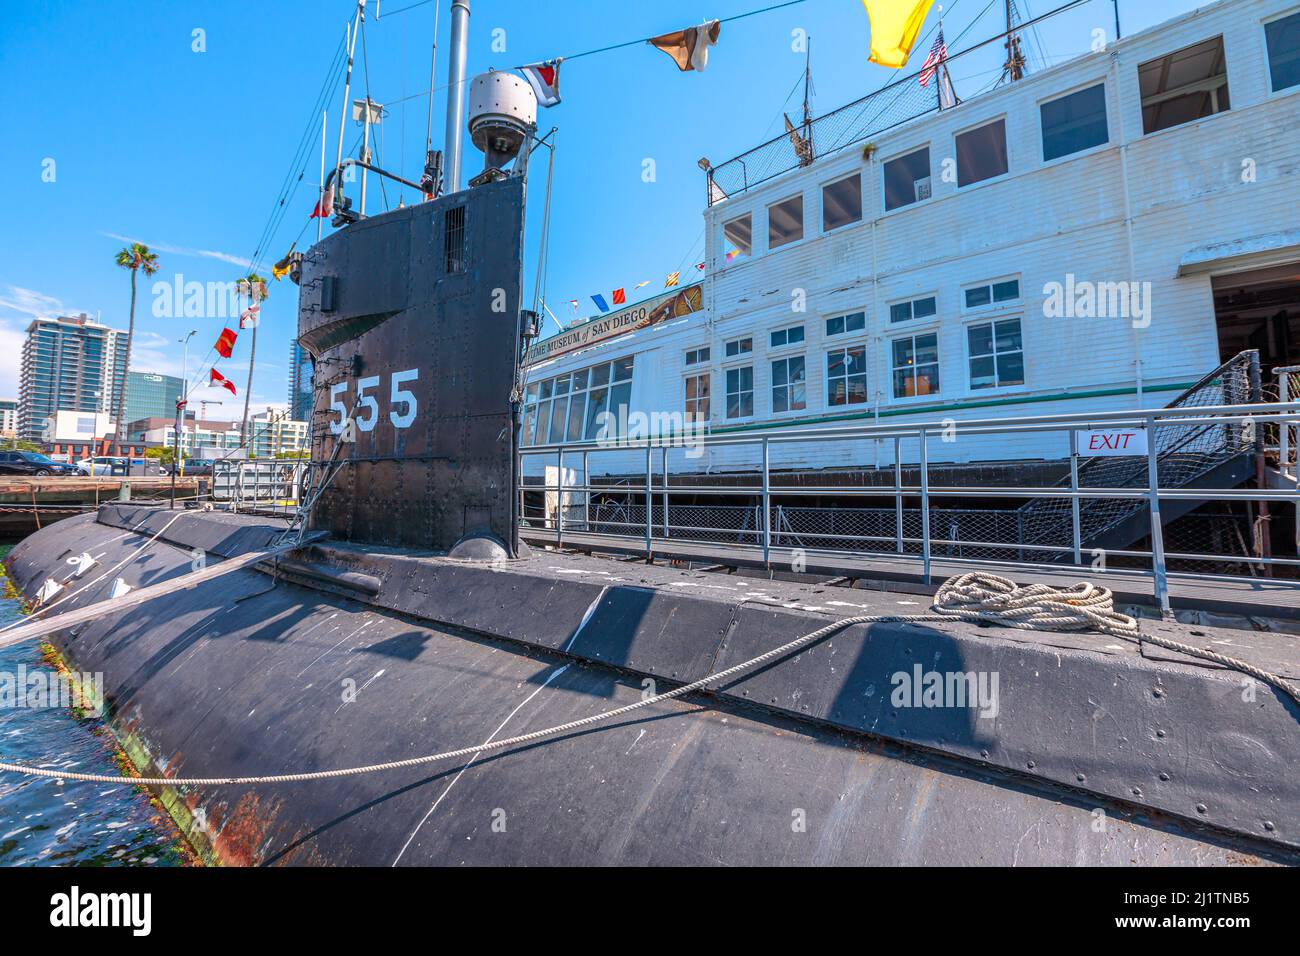 San Diego, Navy Pier, California, USA - 1. August 2018: USS Dolphin AGSS-555 American Submarine of United States Navy im Maritime Museum of San Diego Stockfoto